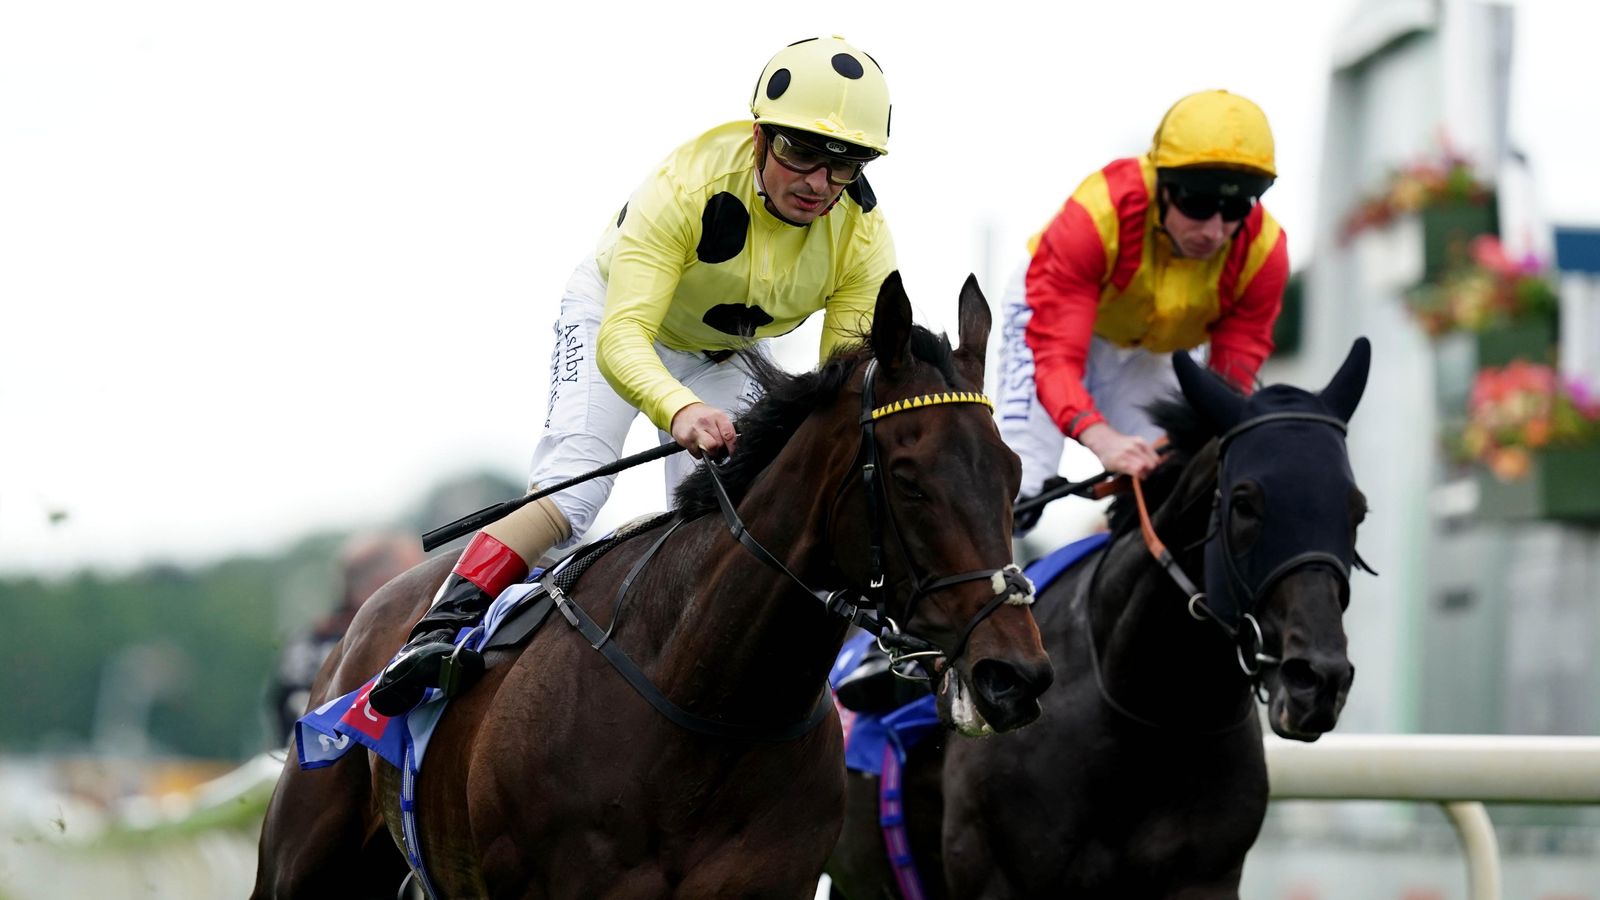 Without A Fight comes out on top at York